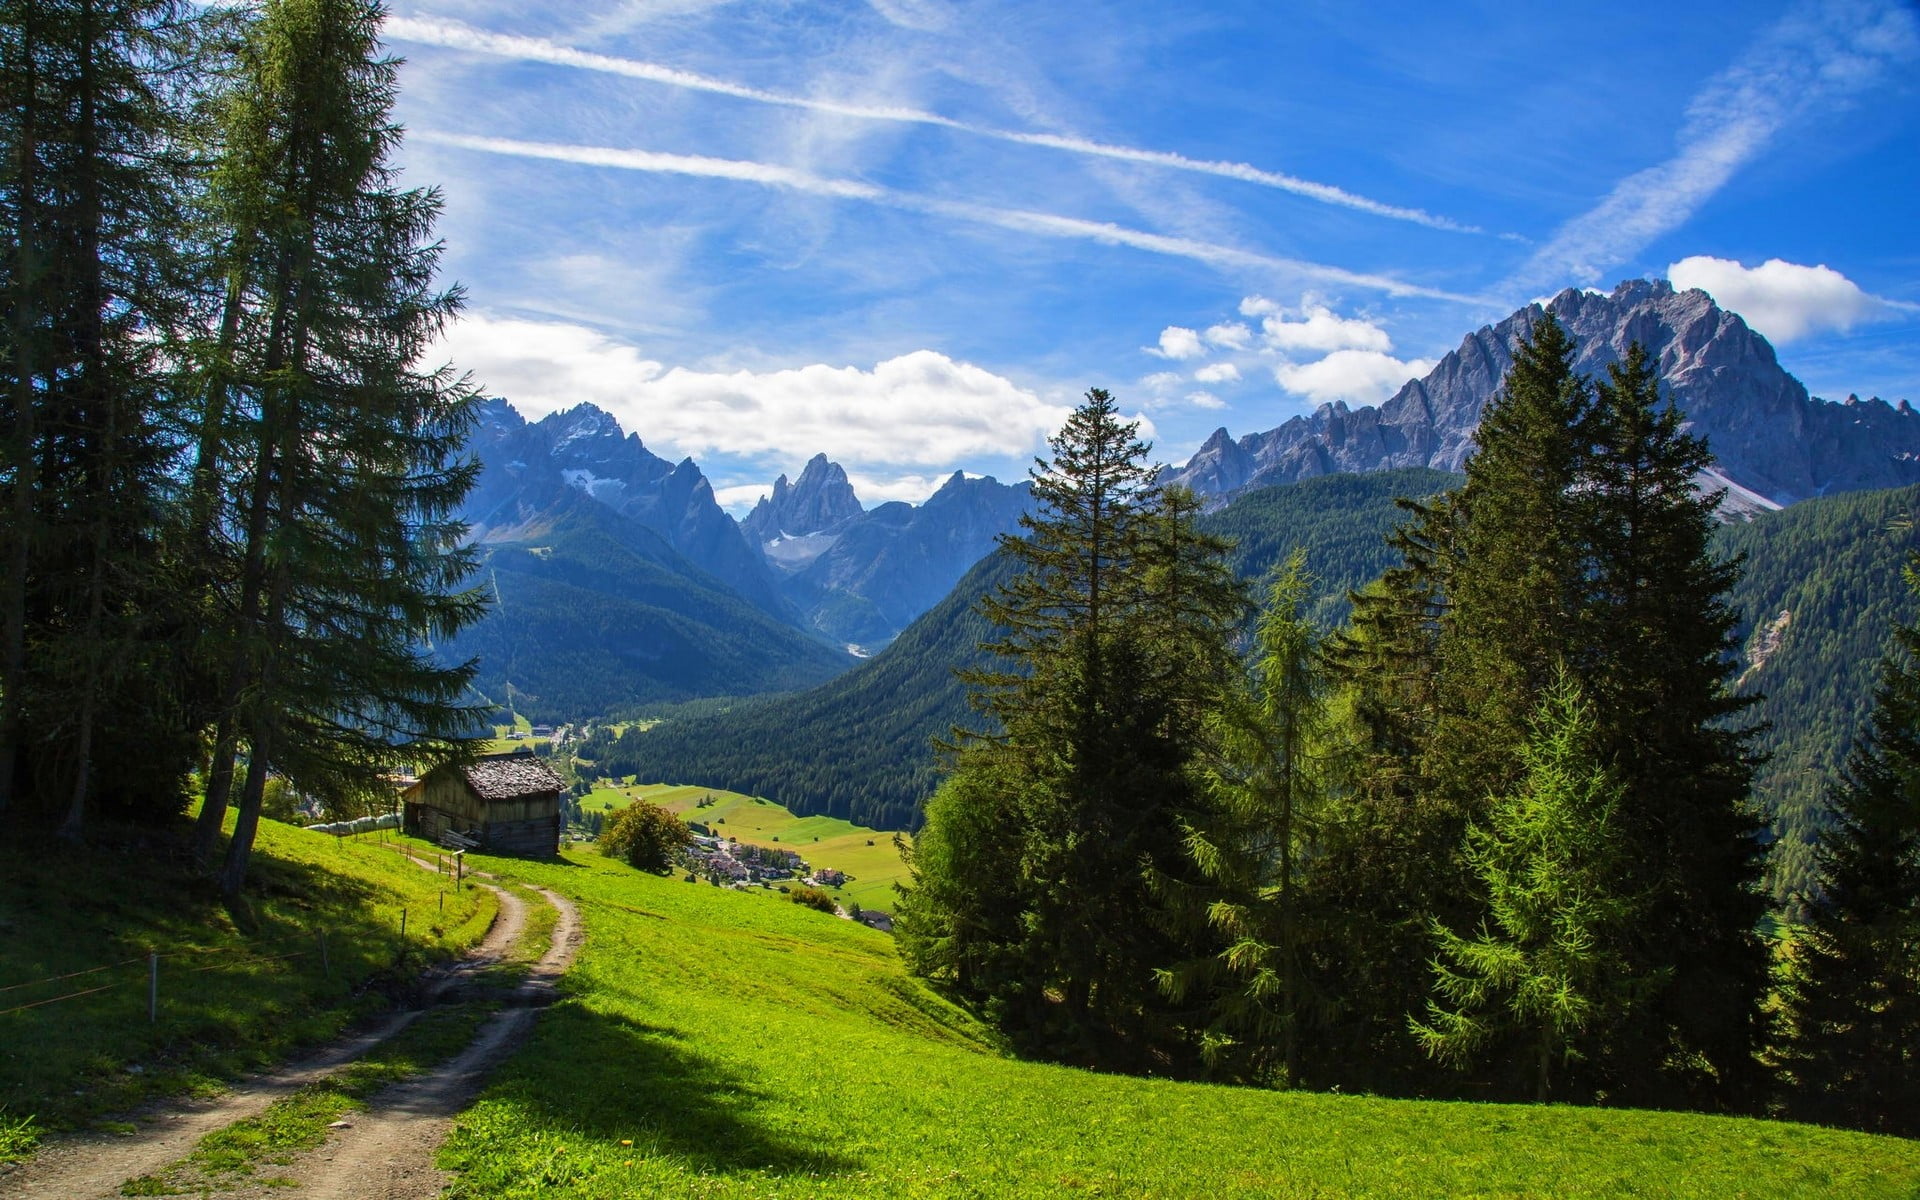 green grass, nature, landscape, mountains, Alps, valley, path